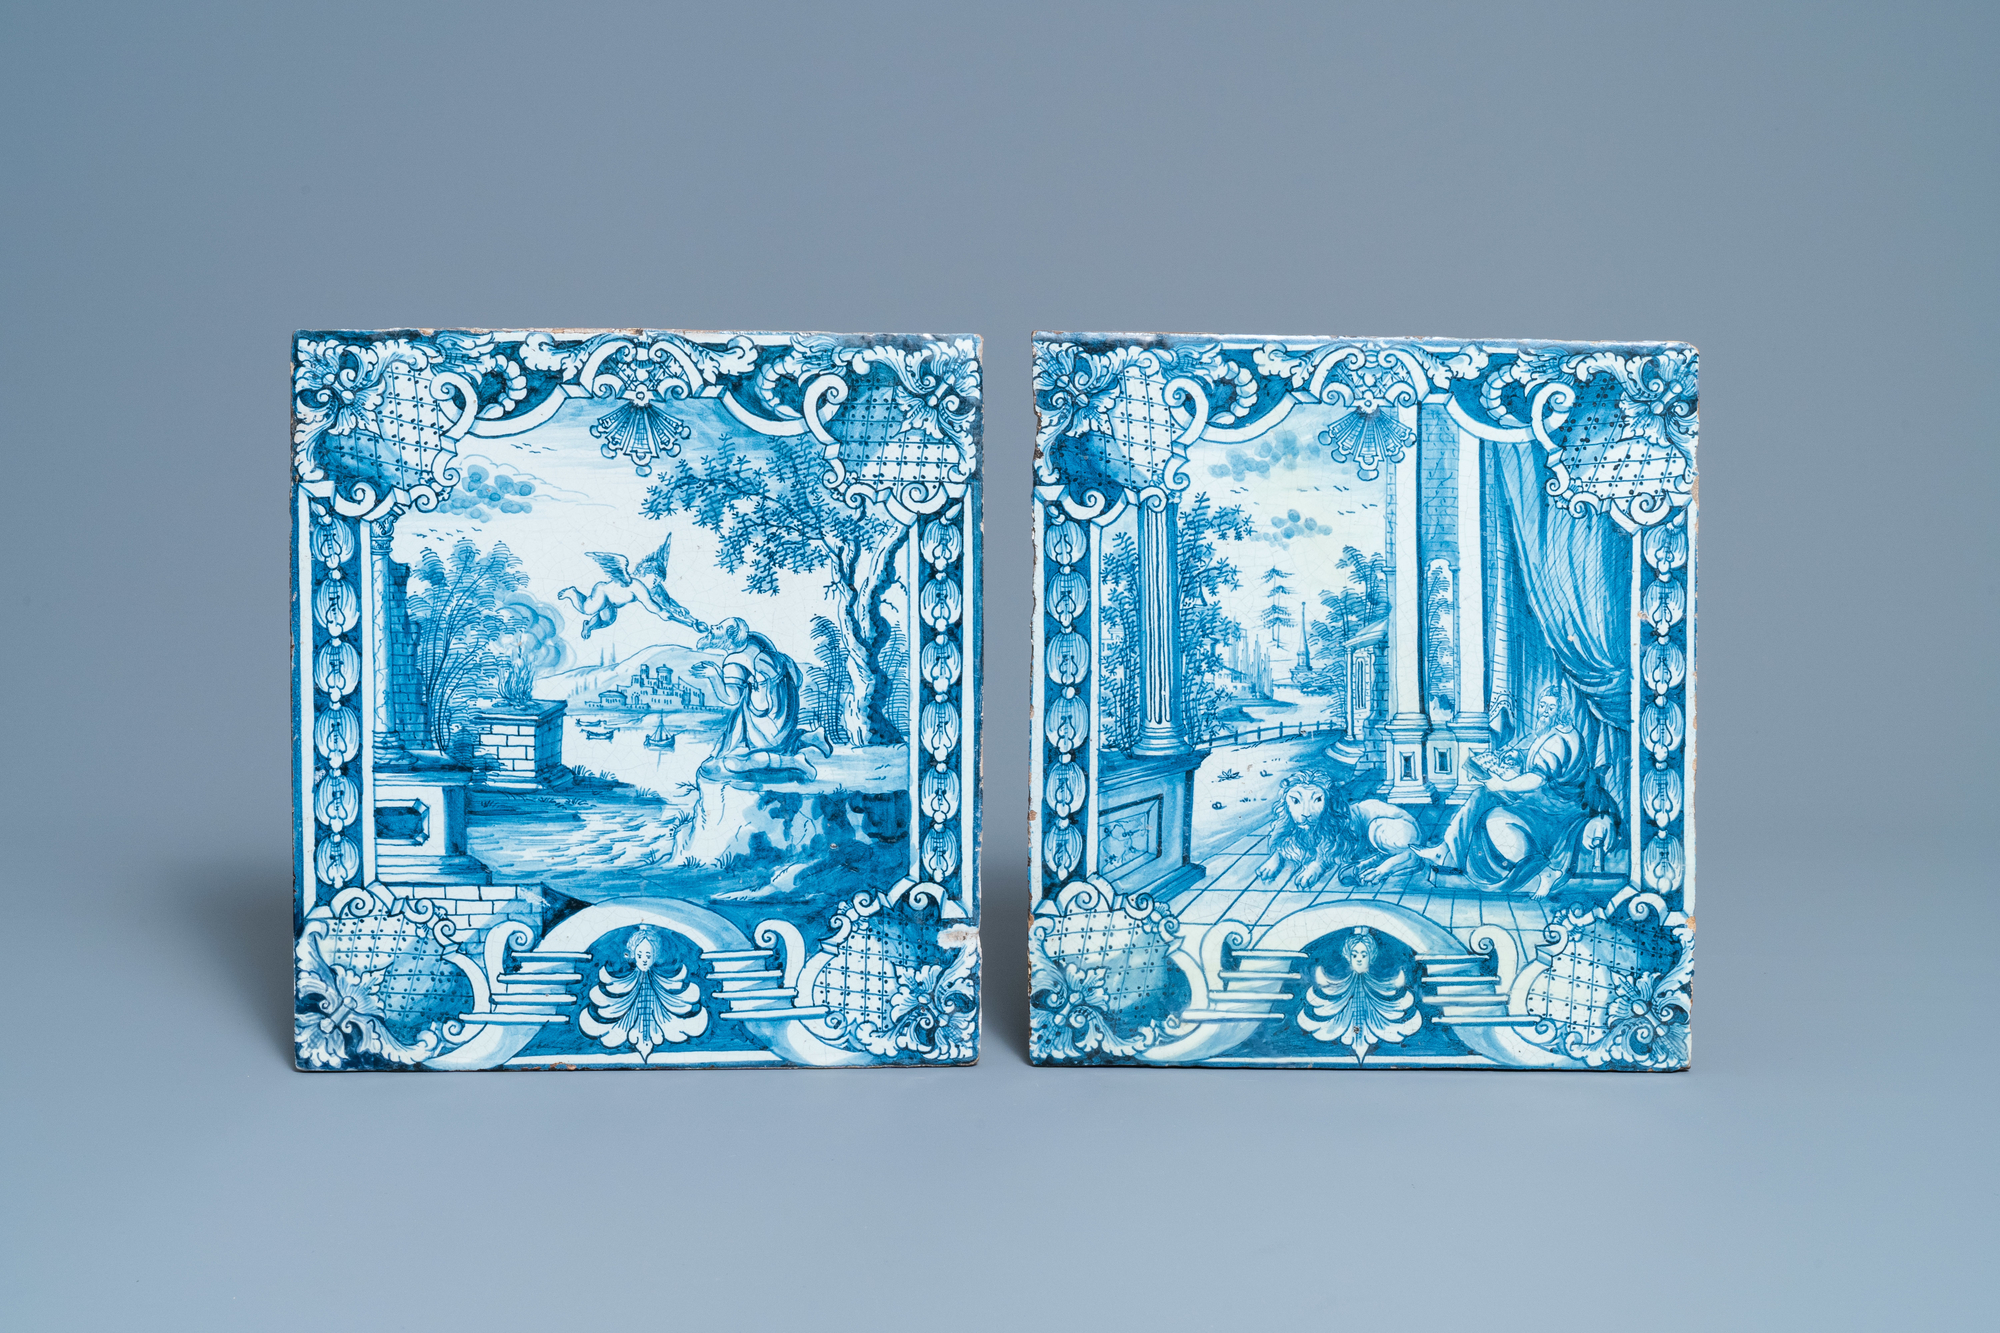 Two blue and white German stove tiles with biblical scenes, Nuremberg, 18th C.